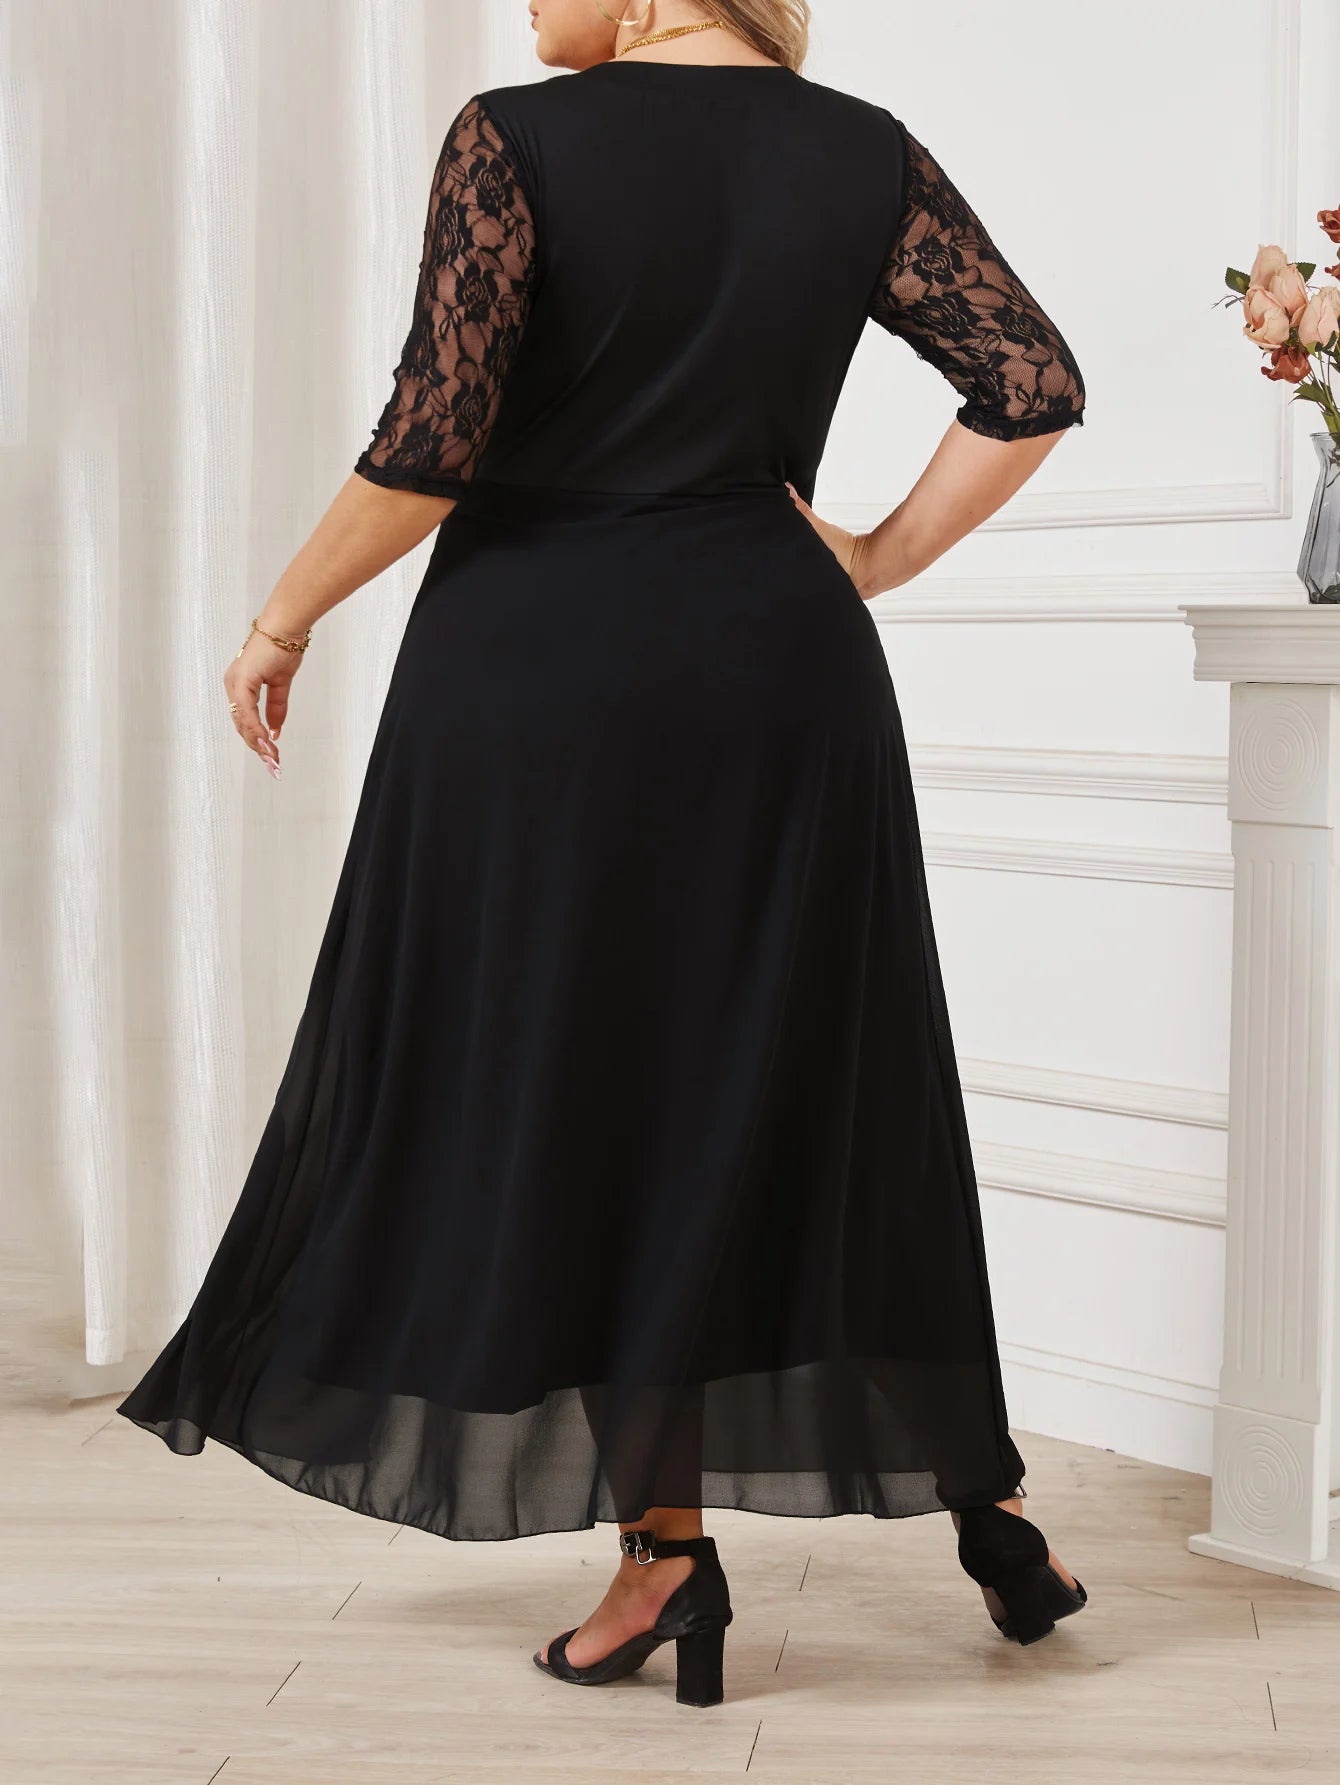 Summer Black Long Dress Female Lace Patchwork See Through Sexy Elegant and Pretty Women's Dresses Plus Size Women Clothing